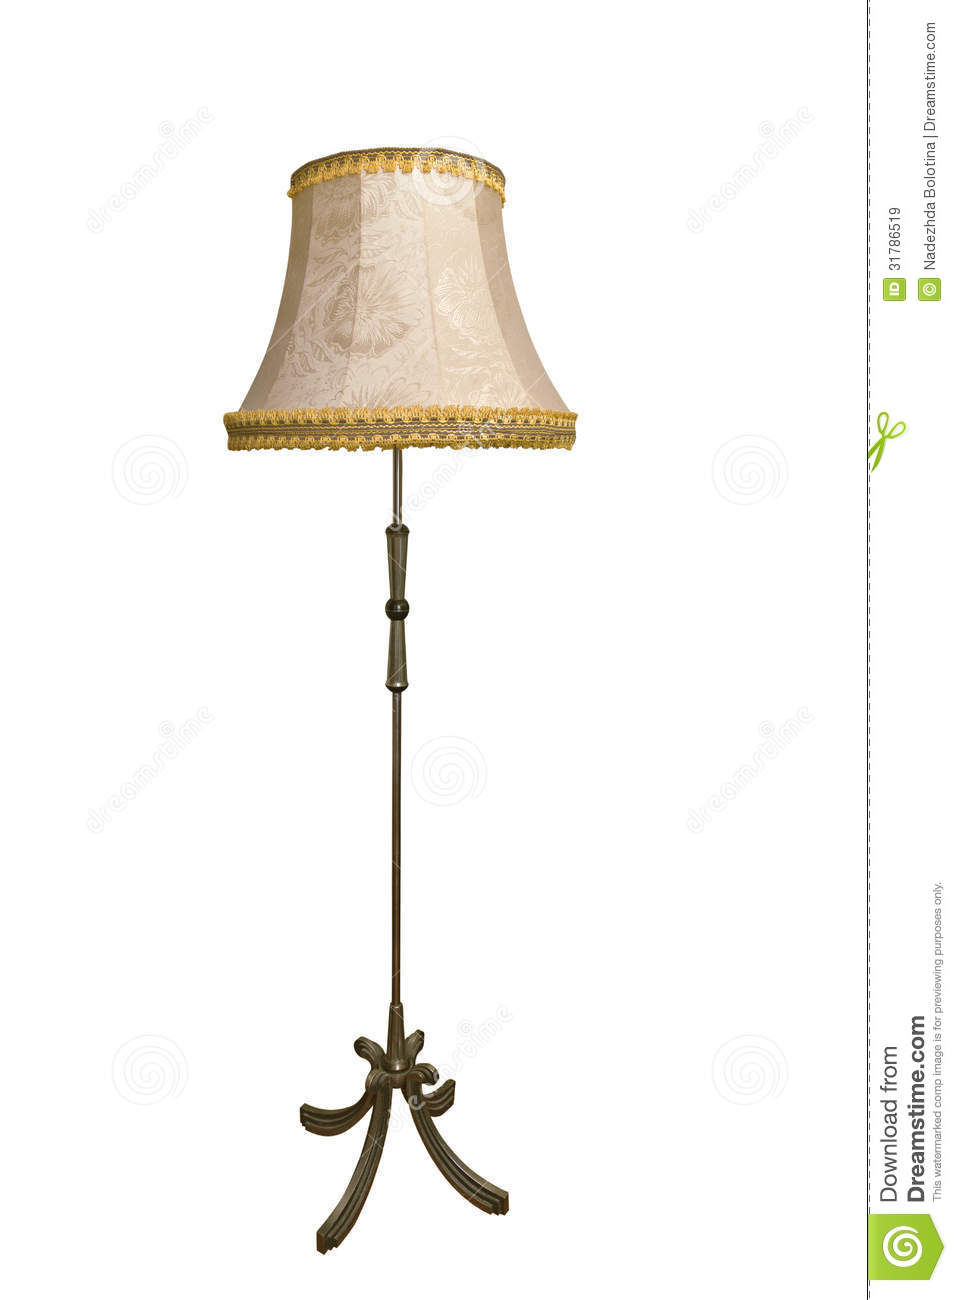 Floor Lamp Clipart Black And White   Clipart Panda   Free Clipart    